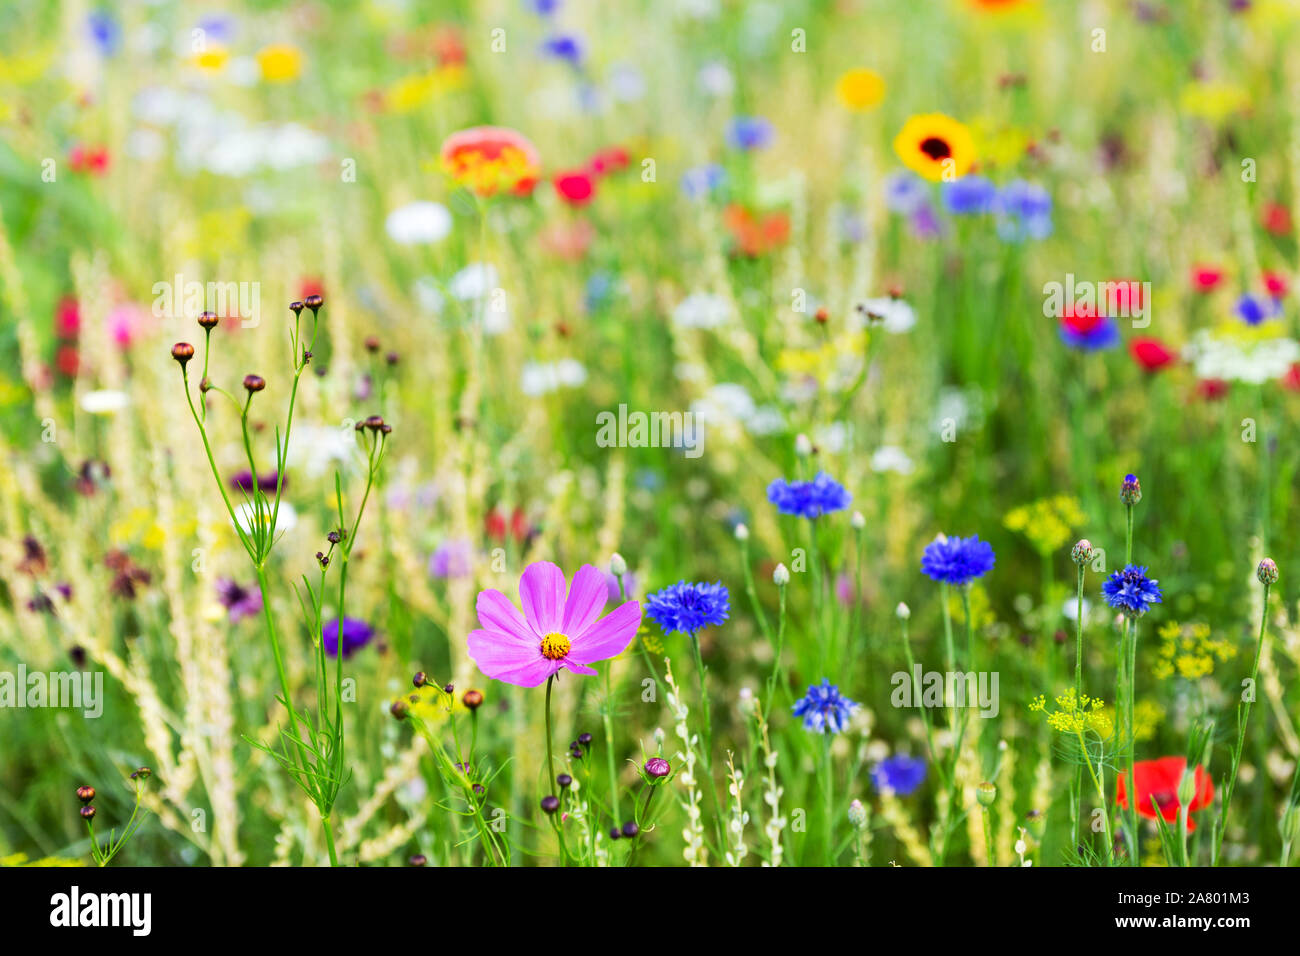 Colorful wild flower meadow, background for the spring or summer season and gardening Stock Photo